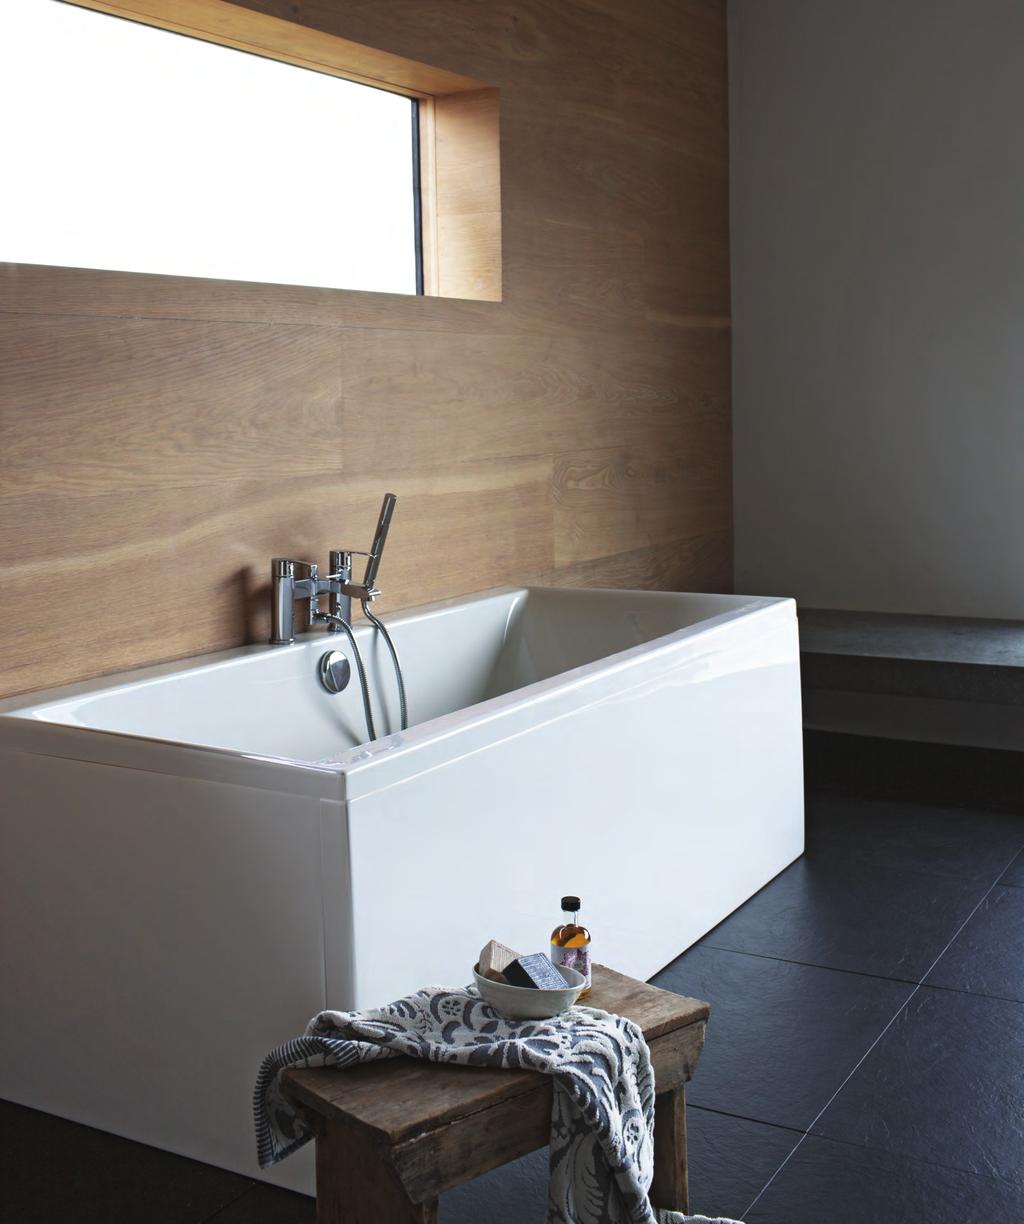 ENVIRO Double ended bath The Enviro provides a square internal shape for those preferring the more angular look.